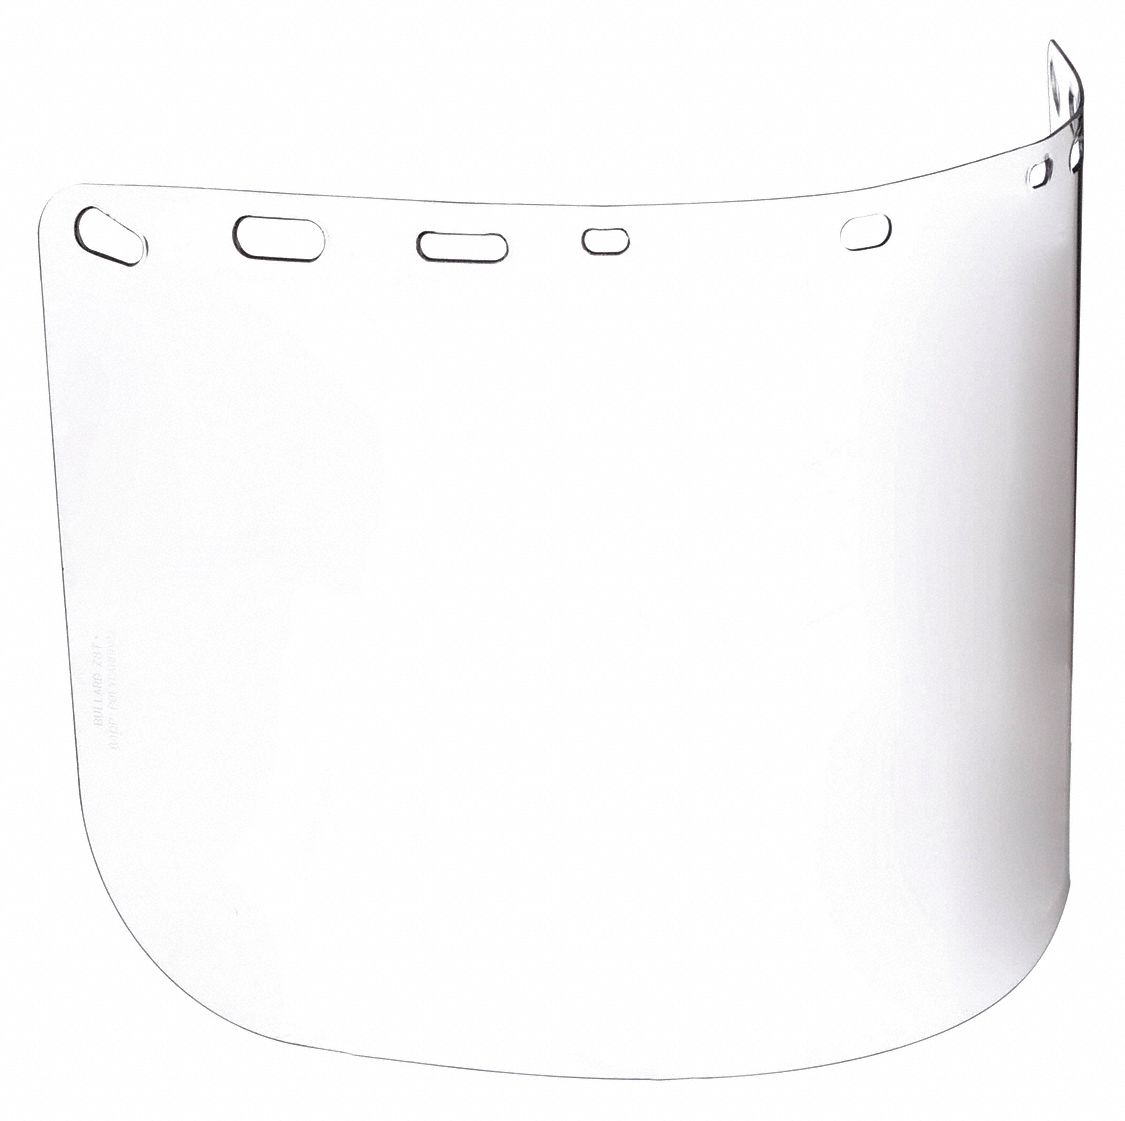 VISOR, FLAT, CLEAR, PC, 15 X 8 X0.04 IN, DIELECTRIC, FOR USE WITH SENTINEL SERIES